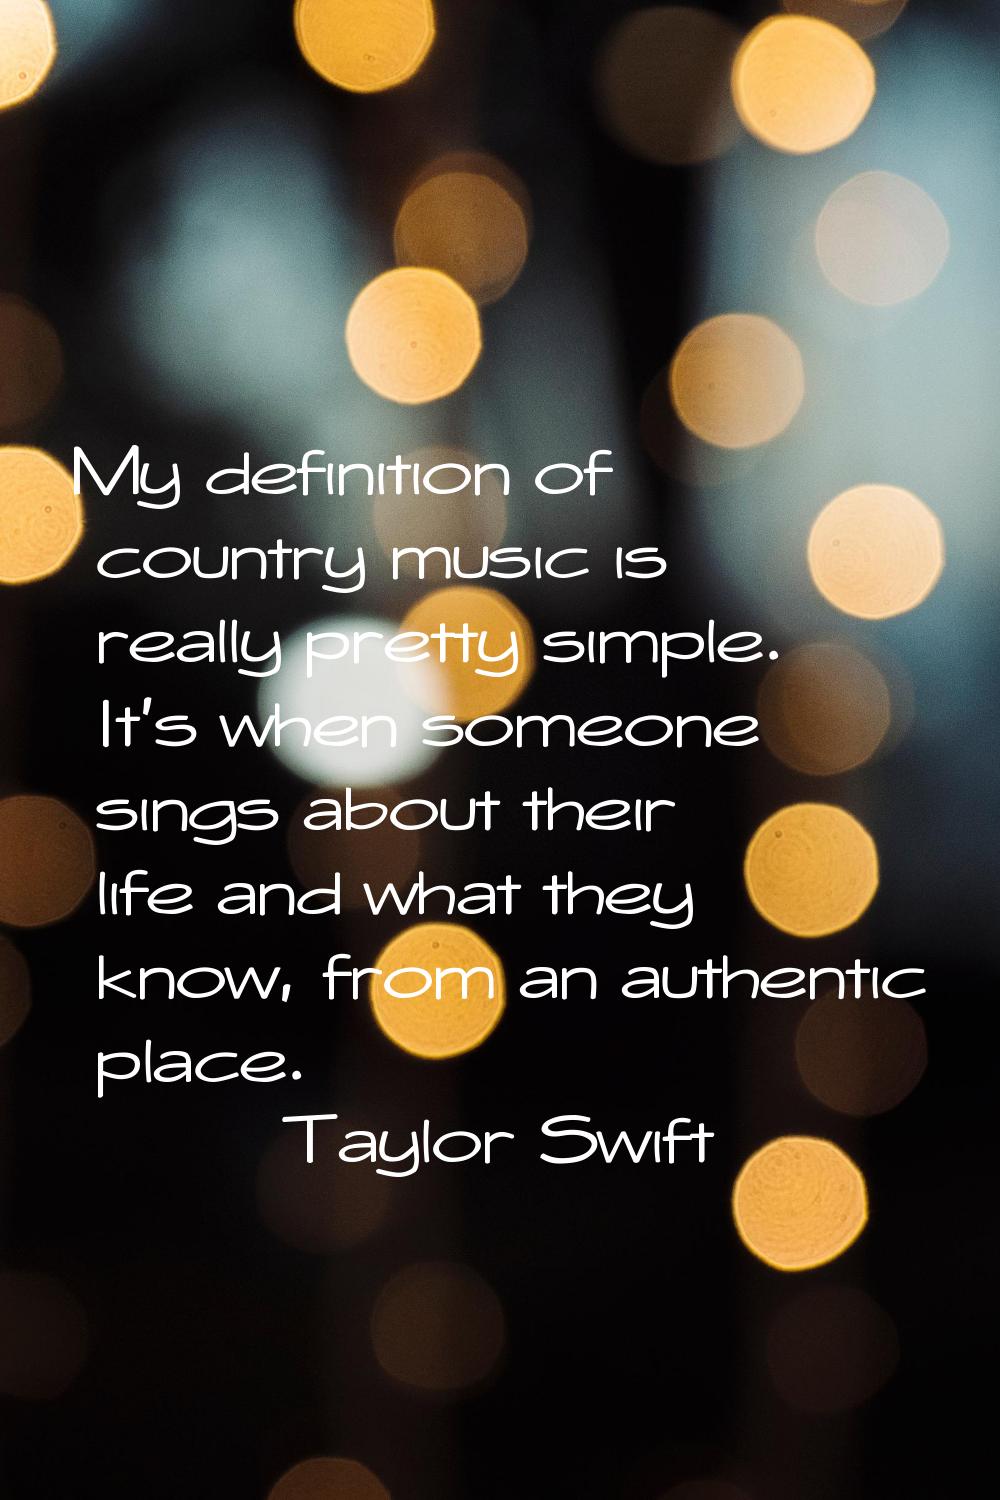 My definition of country music is really pretty simple. It's when someone sings about their life an